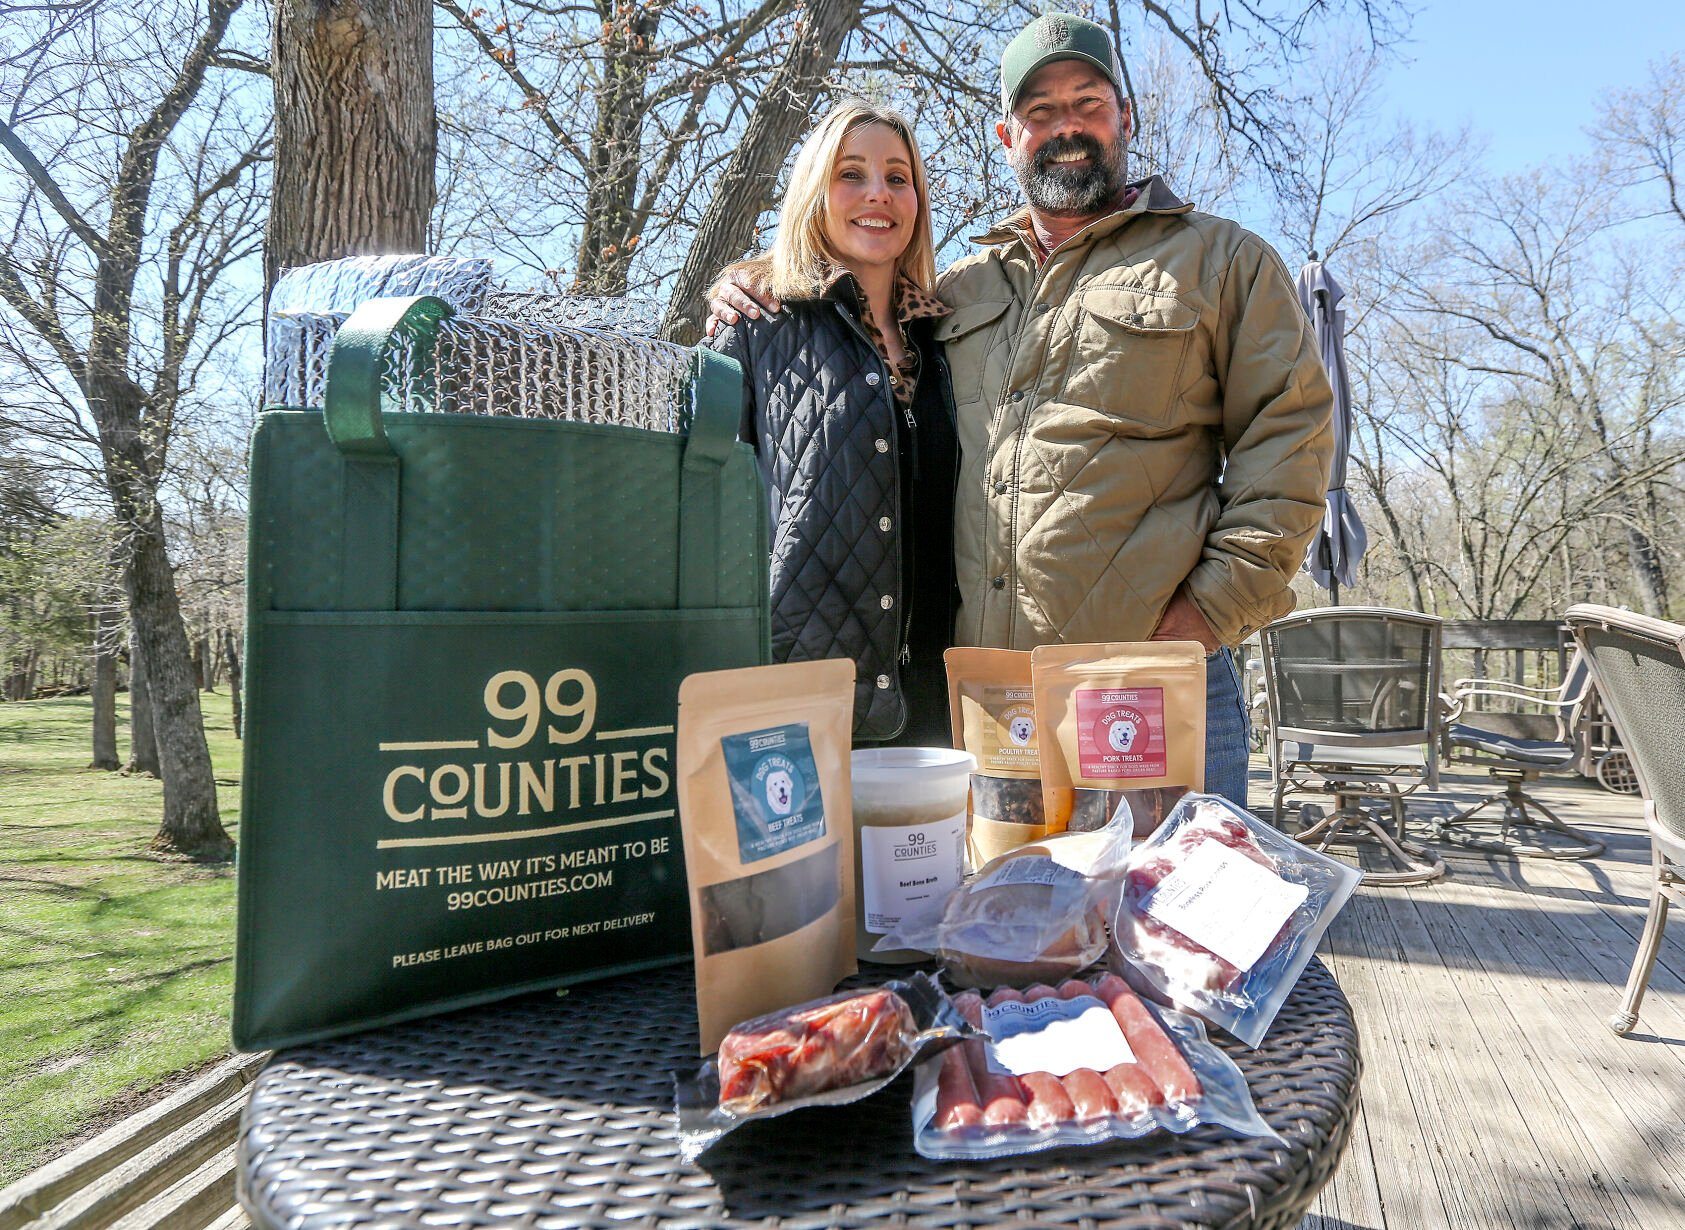 99 Counties sales manager Cindy Stratton and supply chain director Doug Stonebreaker have expanded the delivery business’ reach to Dubuque County. 99 Counties is an Iowa business that brings fresh meat and eggs from local farmers to customers